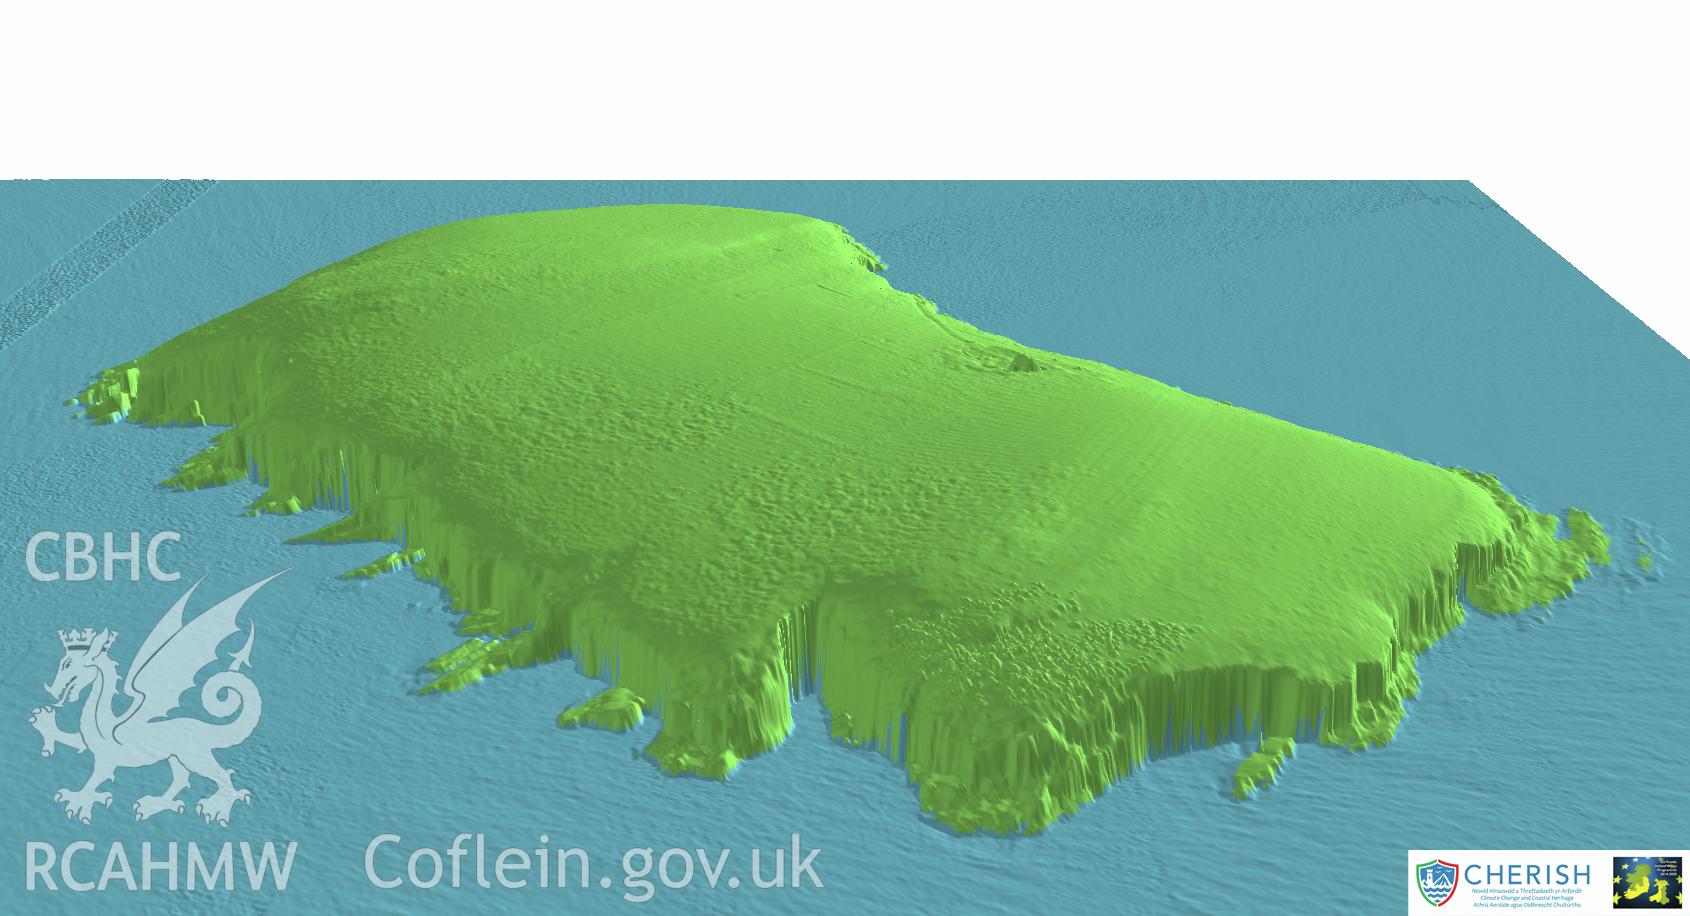 Ynysoedd Tudwal (St. Tudwal?s Islands). Airborne laser scanning (LiDAR) commissioned by the CHERISH Project 2017-2021, flown by Bluesky International LTD at low tide on 24th February 2017. View showing the east island facing east.